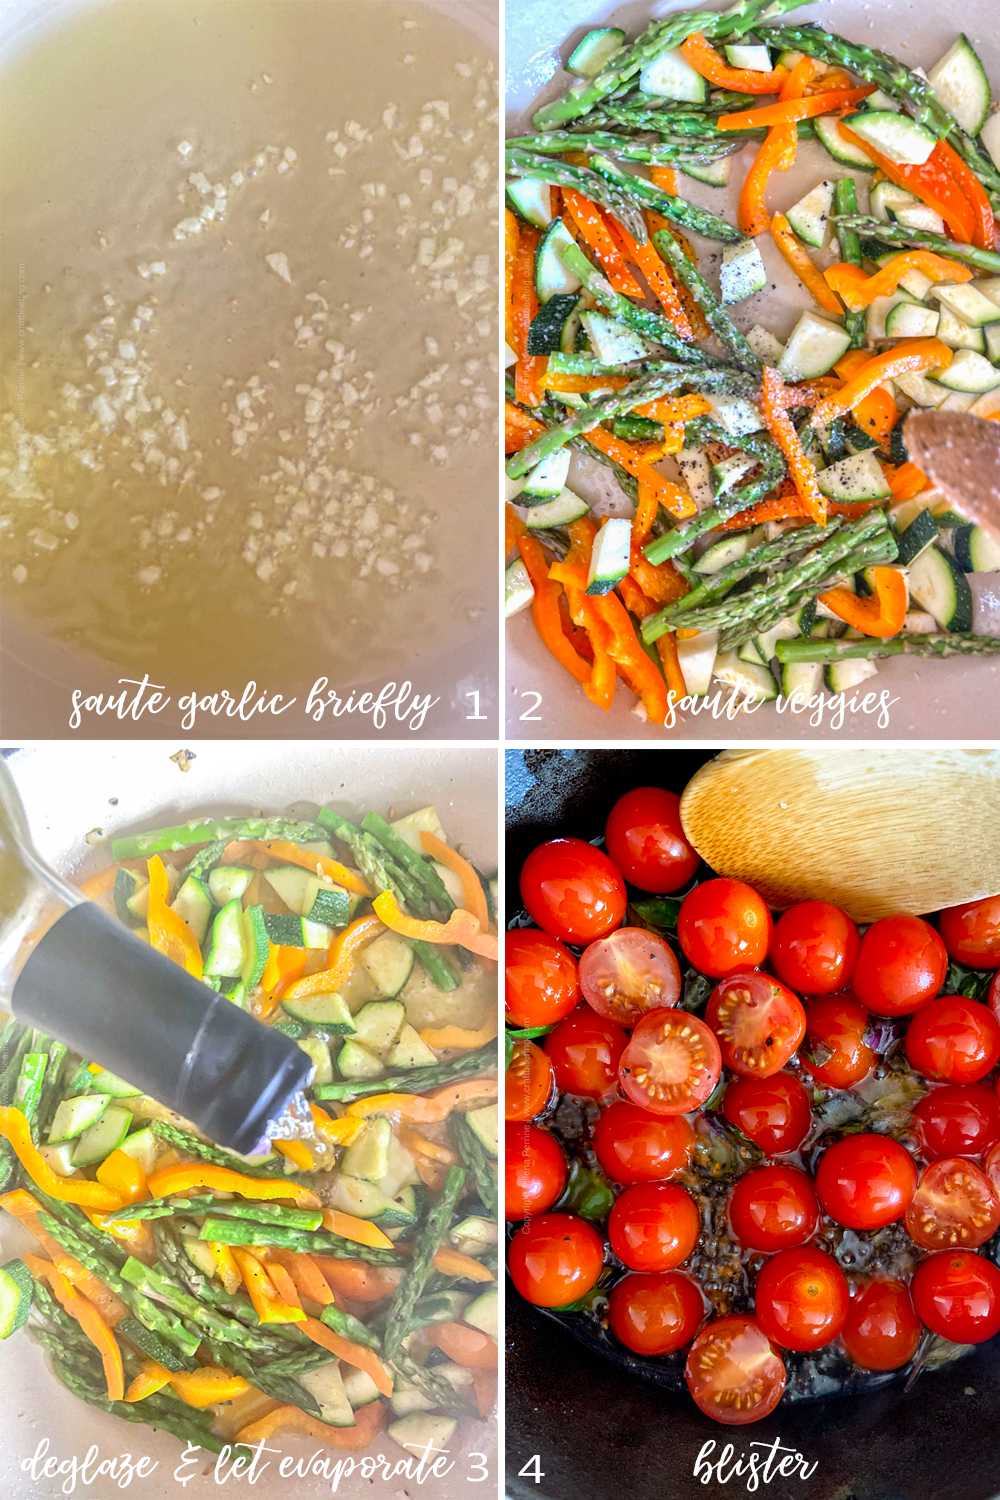 How to make the vegetables for pasta Primavera, process pictures